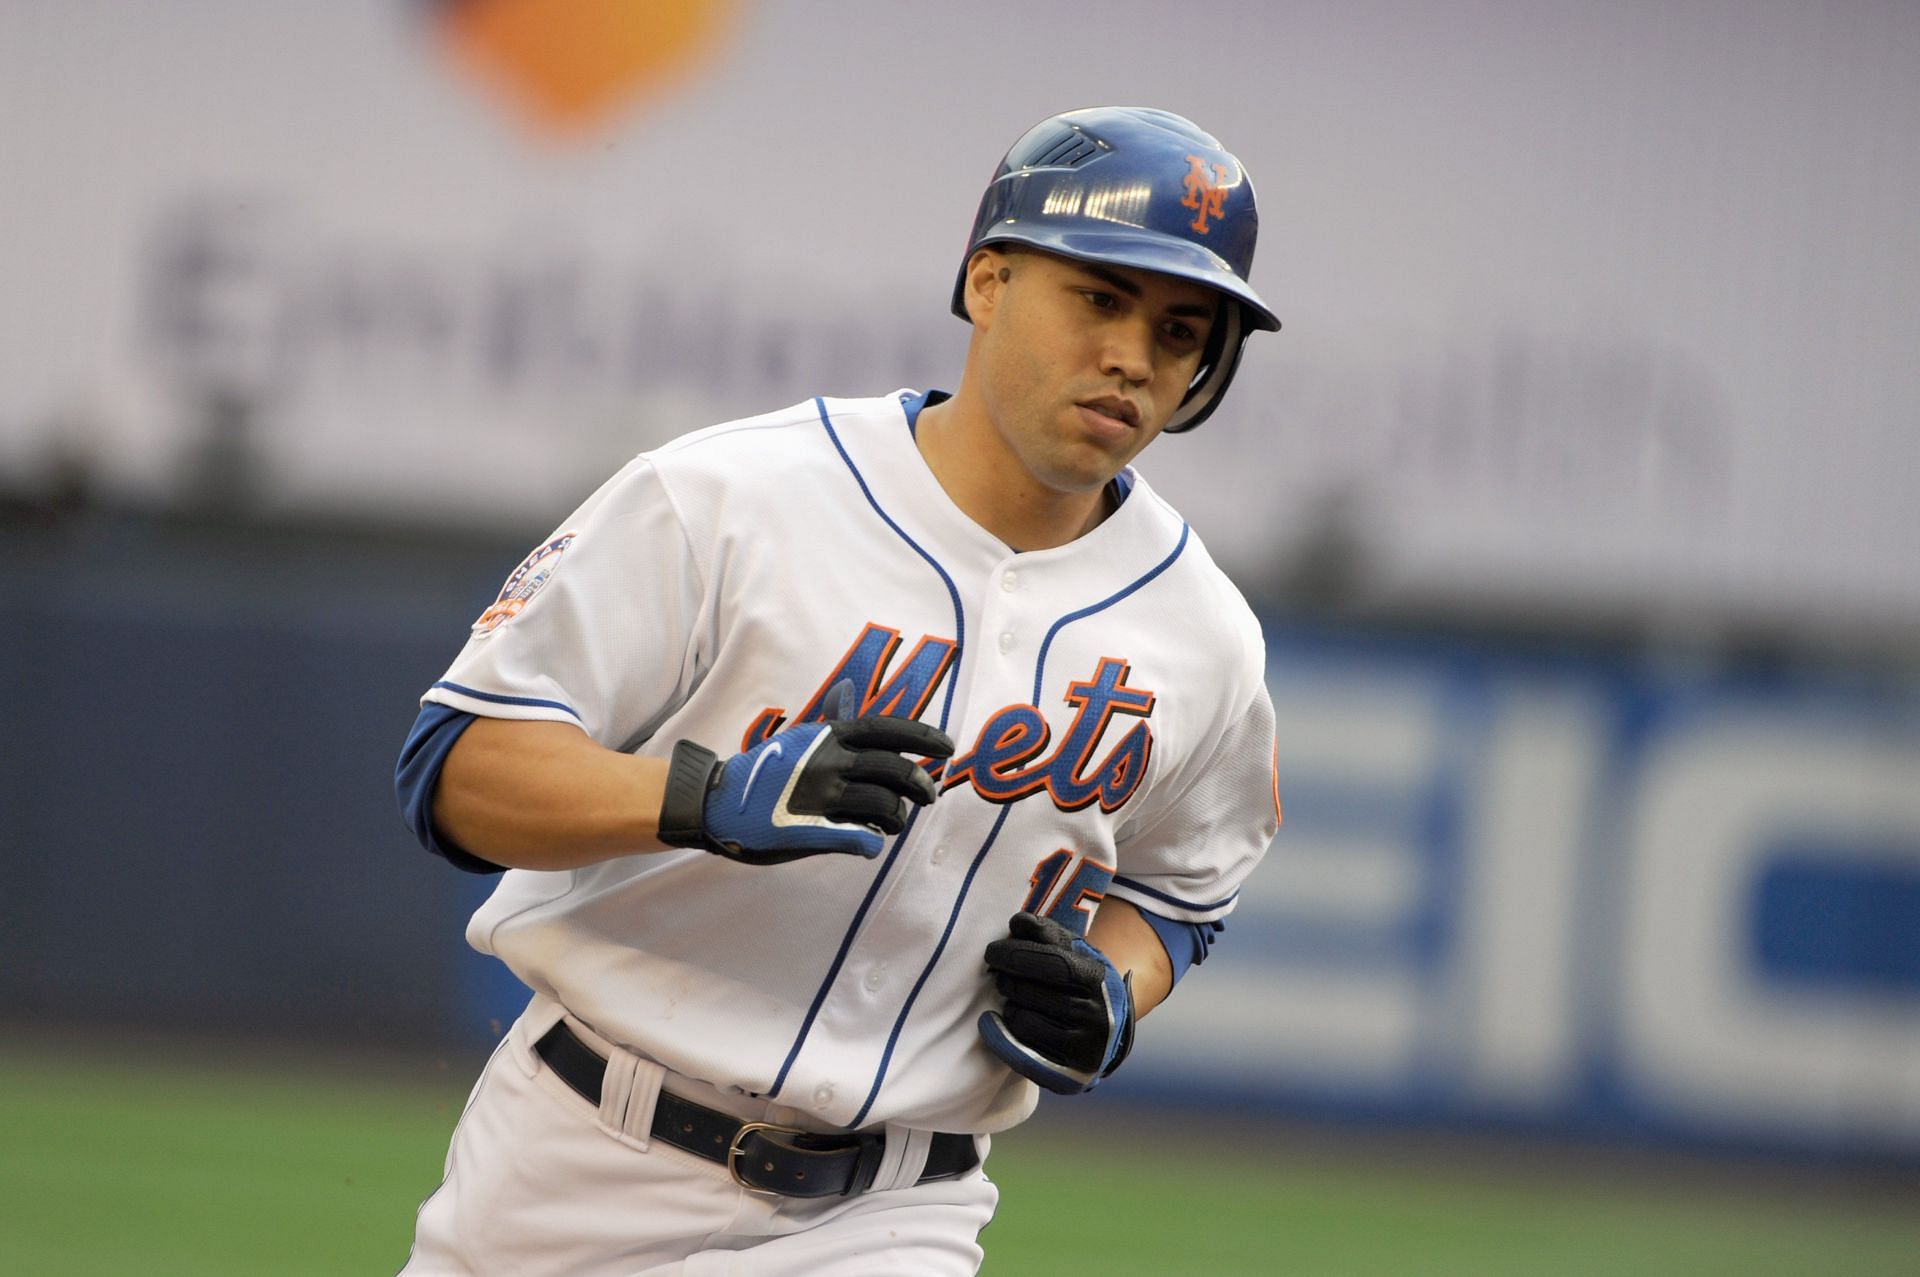 Trade Retrospective: How did the Carlos Beltran Trade to the